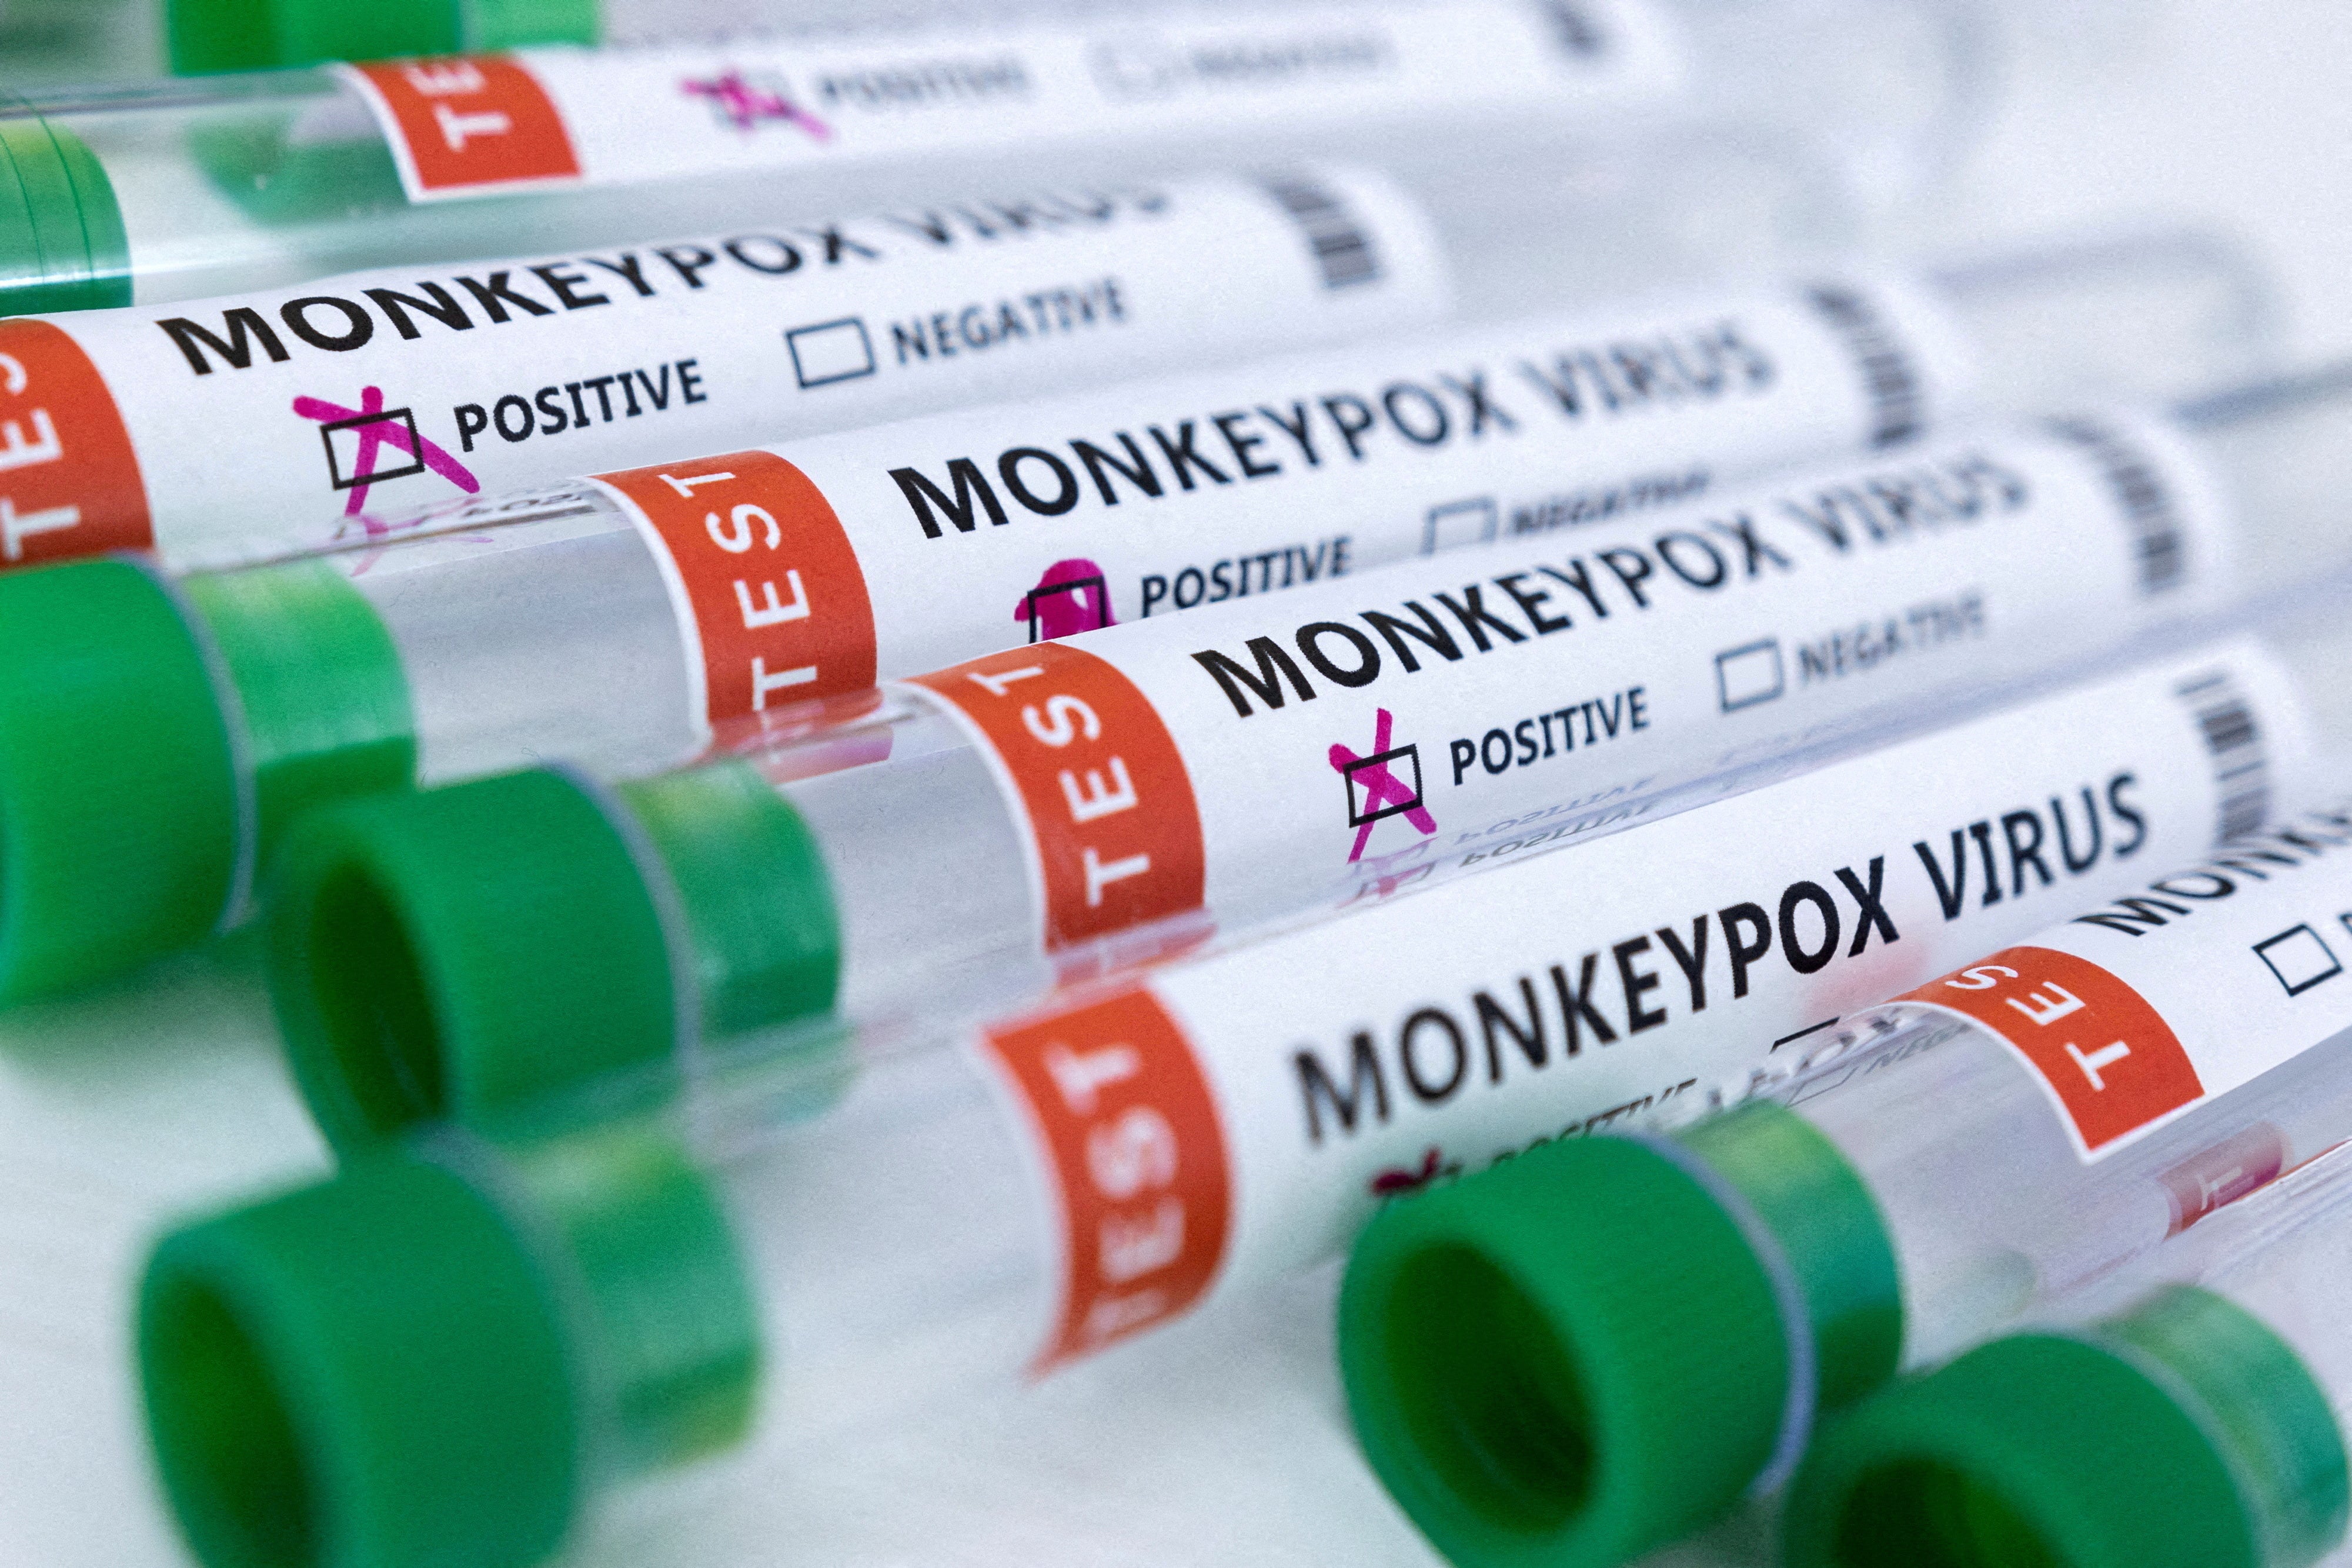 The number of confirmed monkeypox cases in the UK has exceeded 2,100